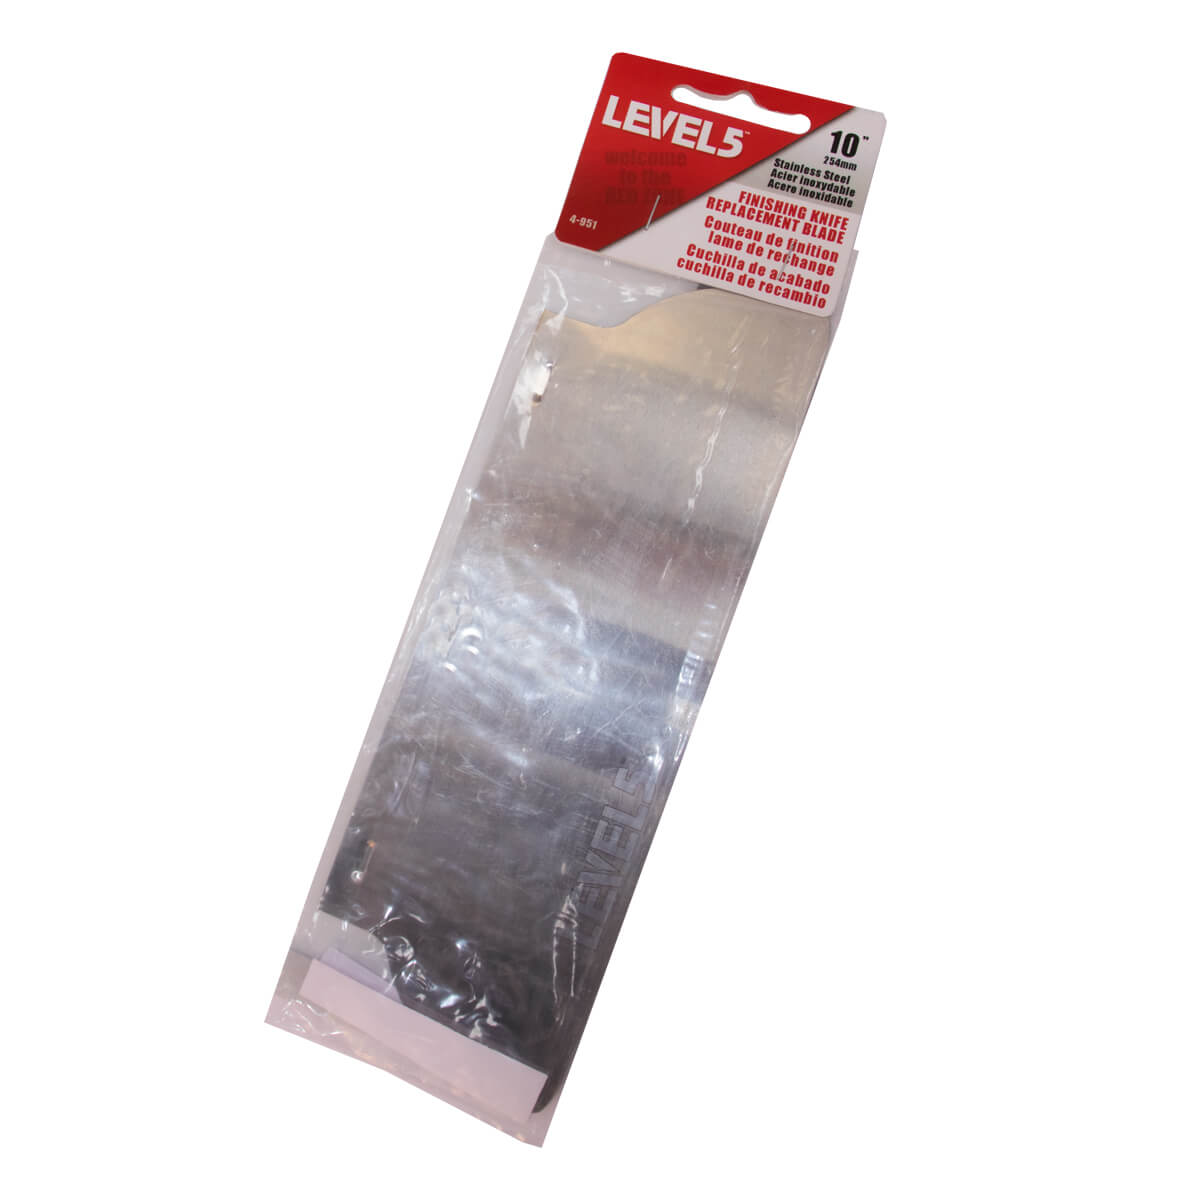 Skimming Replacement Blade 10" 250mm Level5